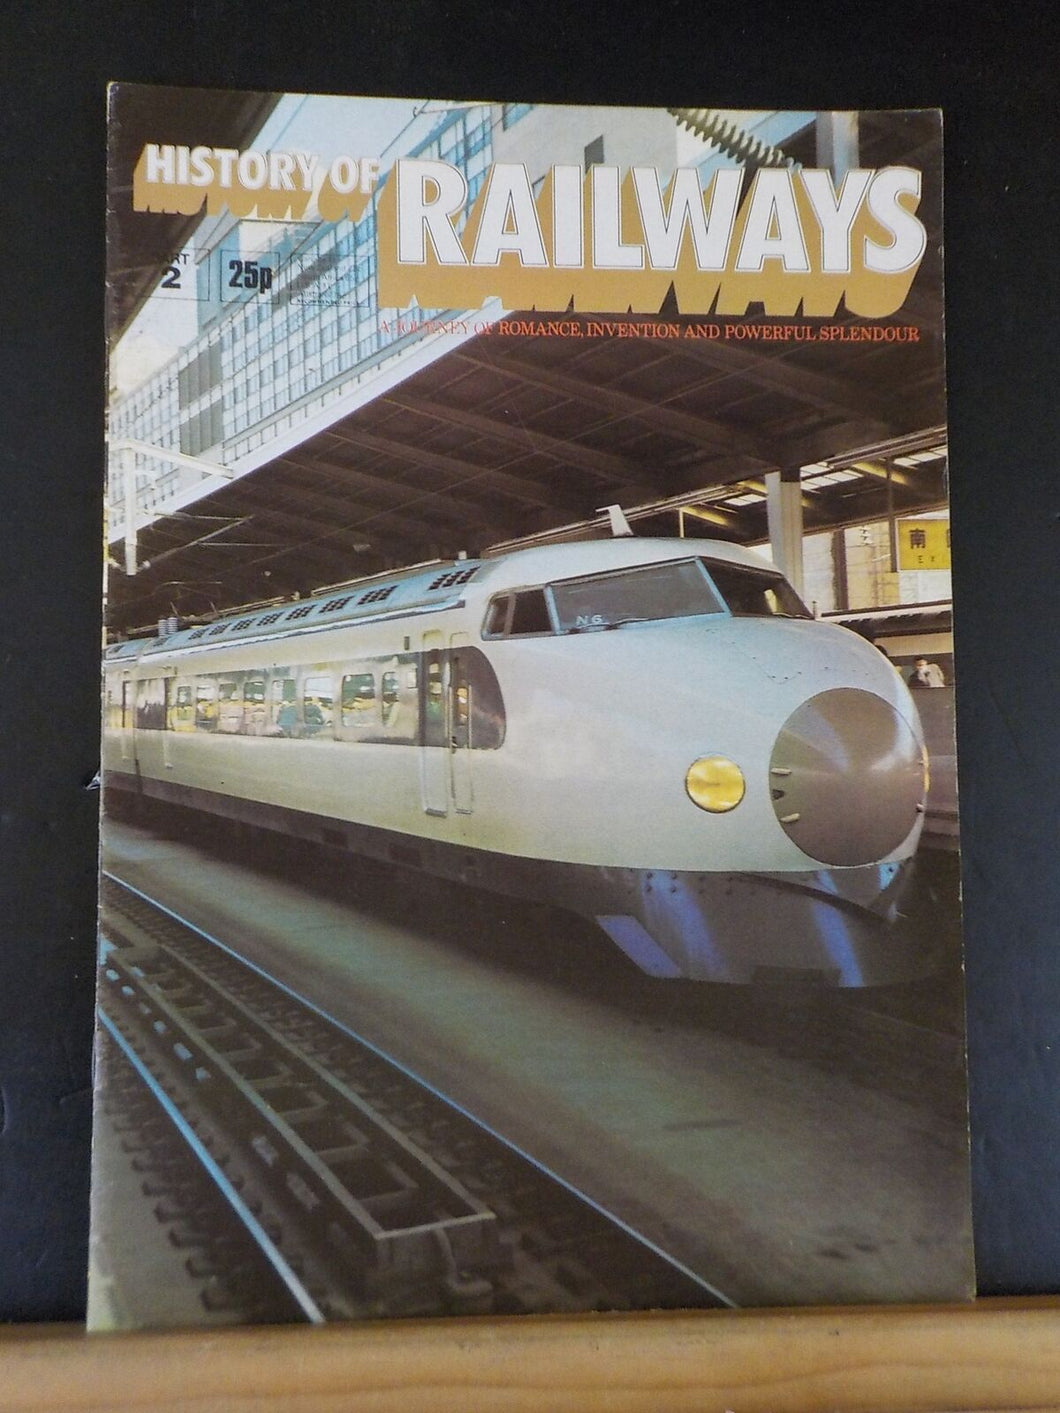 History of Railways Part 2 Journey of Romance Invention and Powerful Splendor